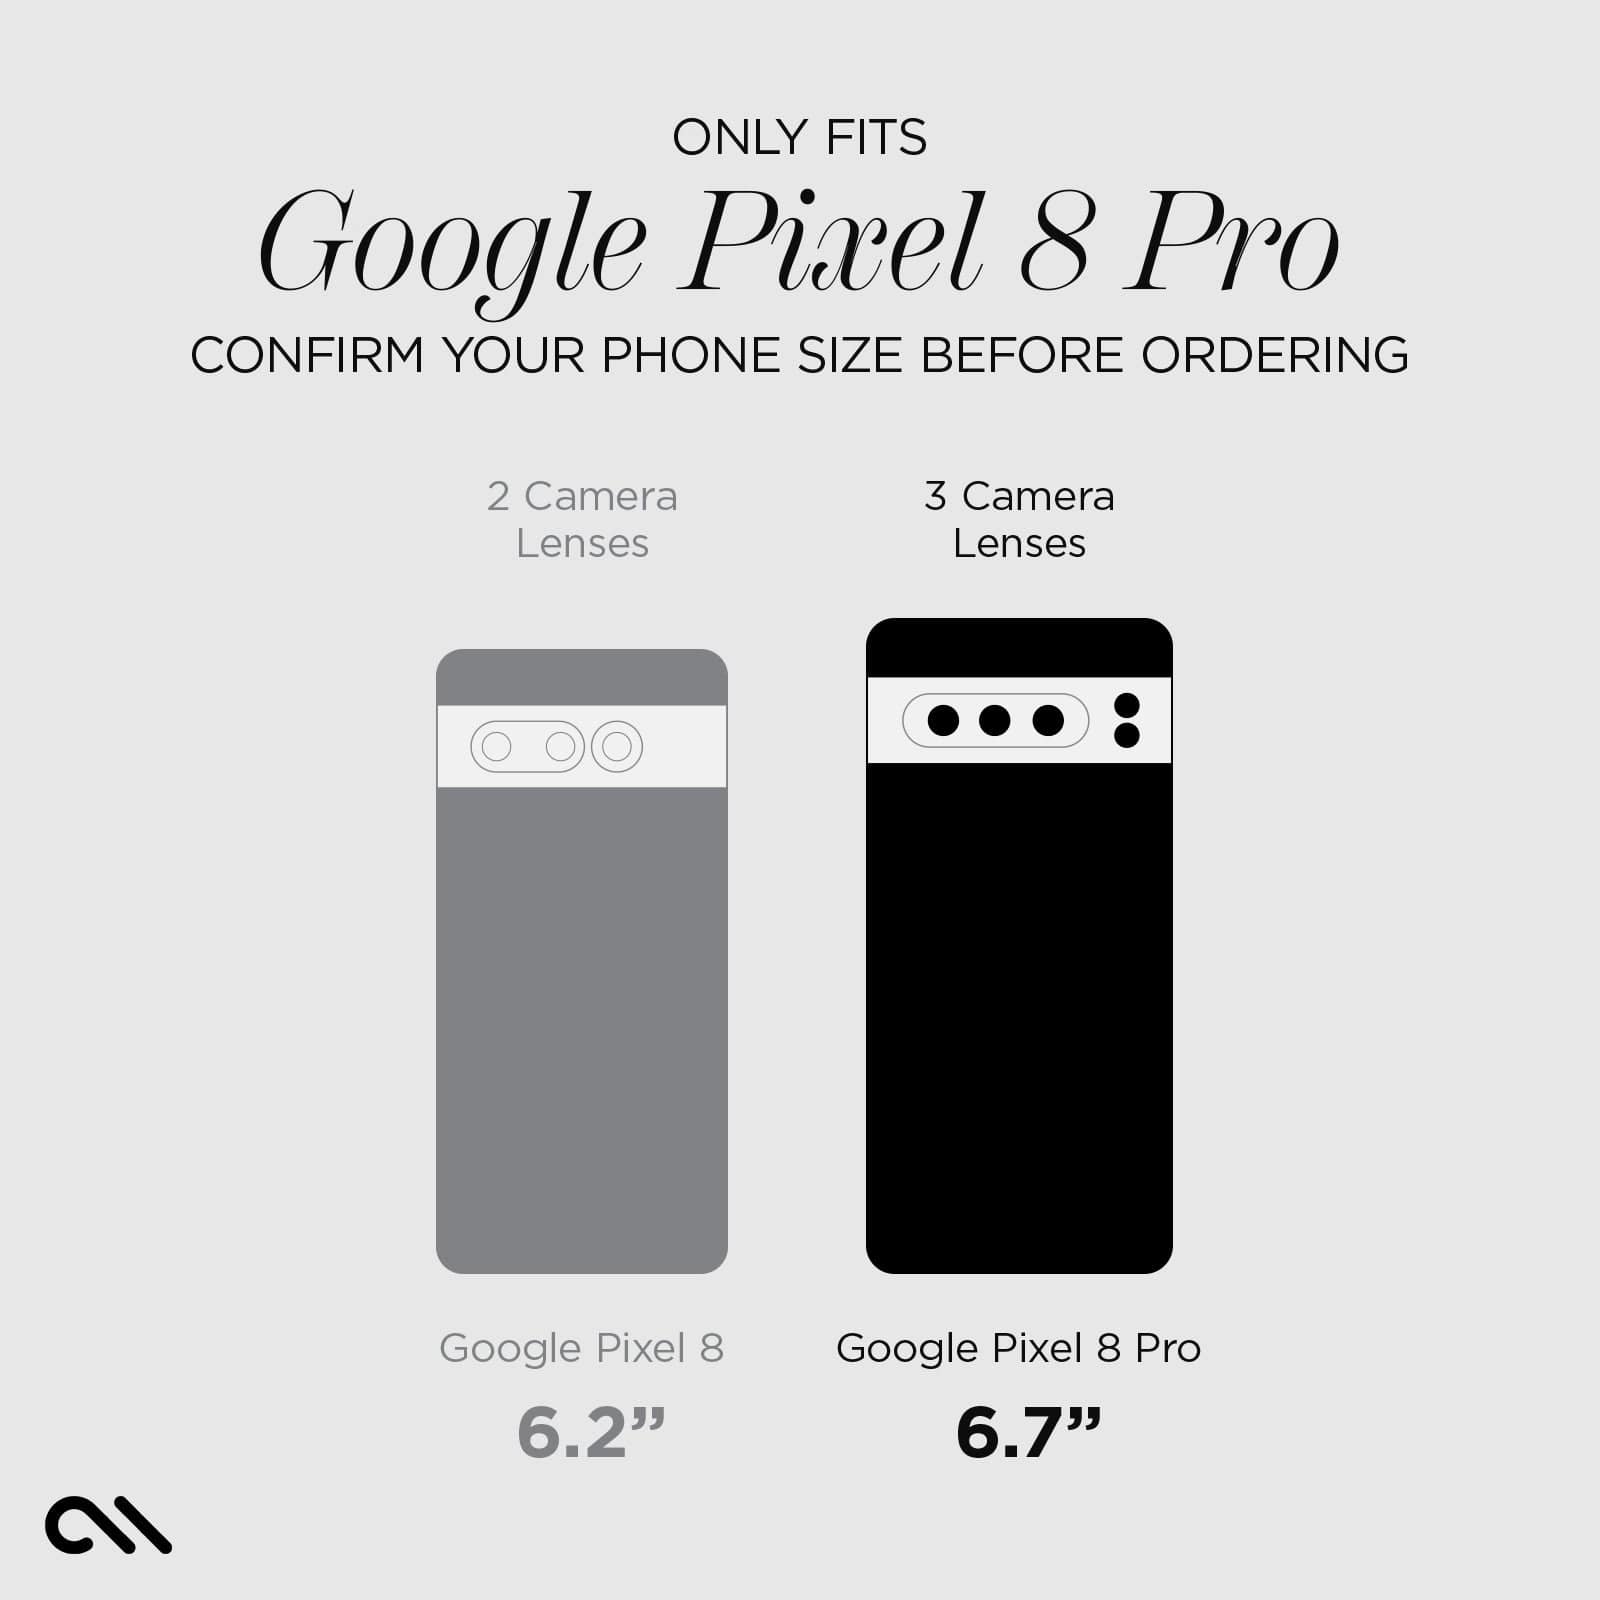 ONLY FITS GOOGLE PIXEL 8 PRO. CONFIRM YOUR PHONE SIZE BEFORE ORDERING